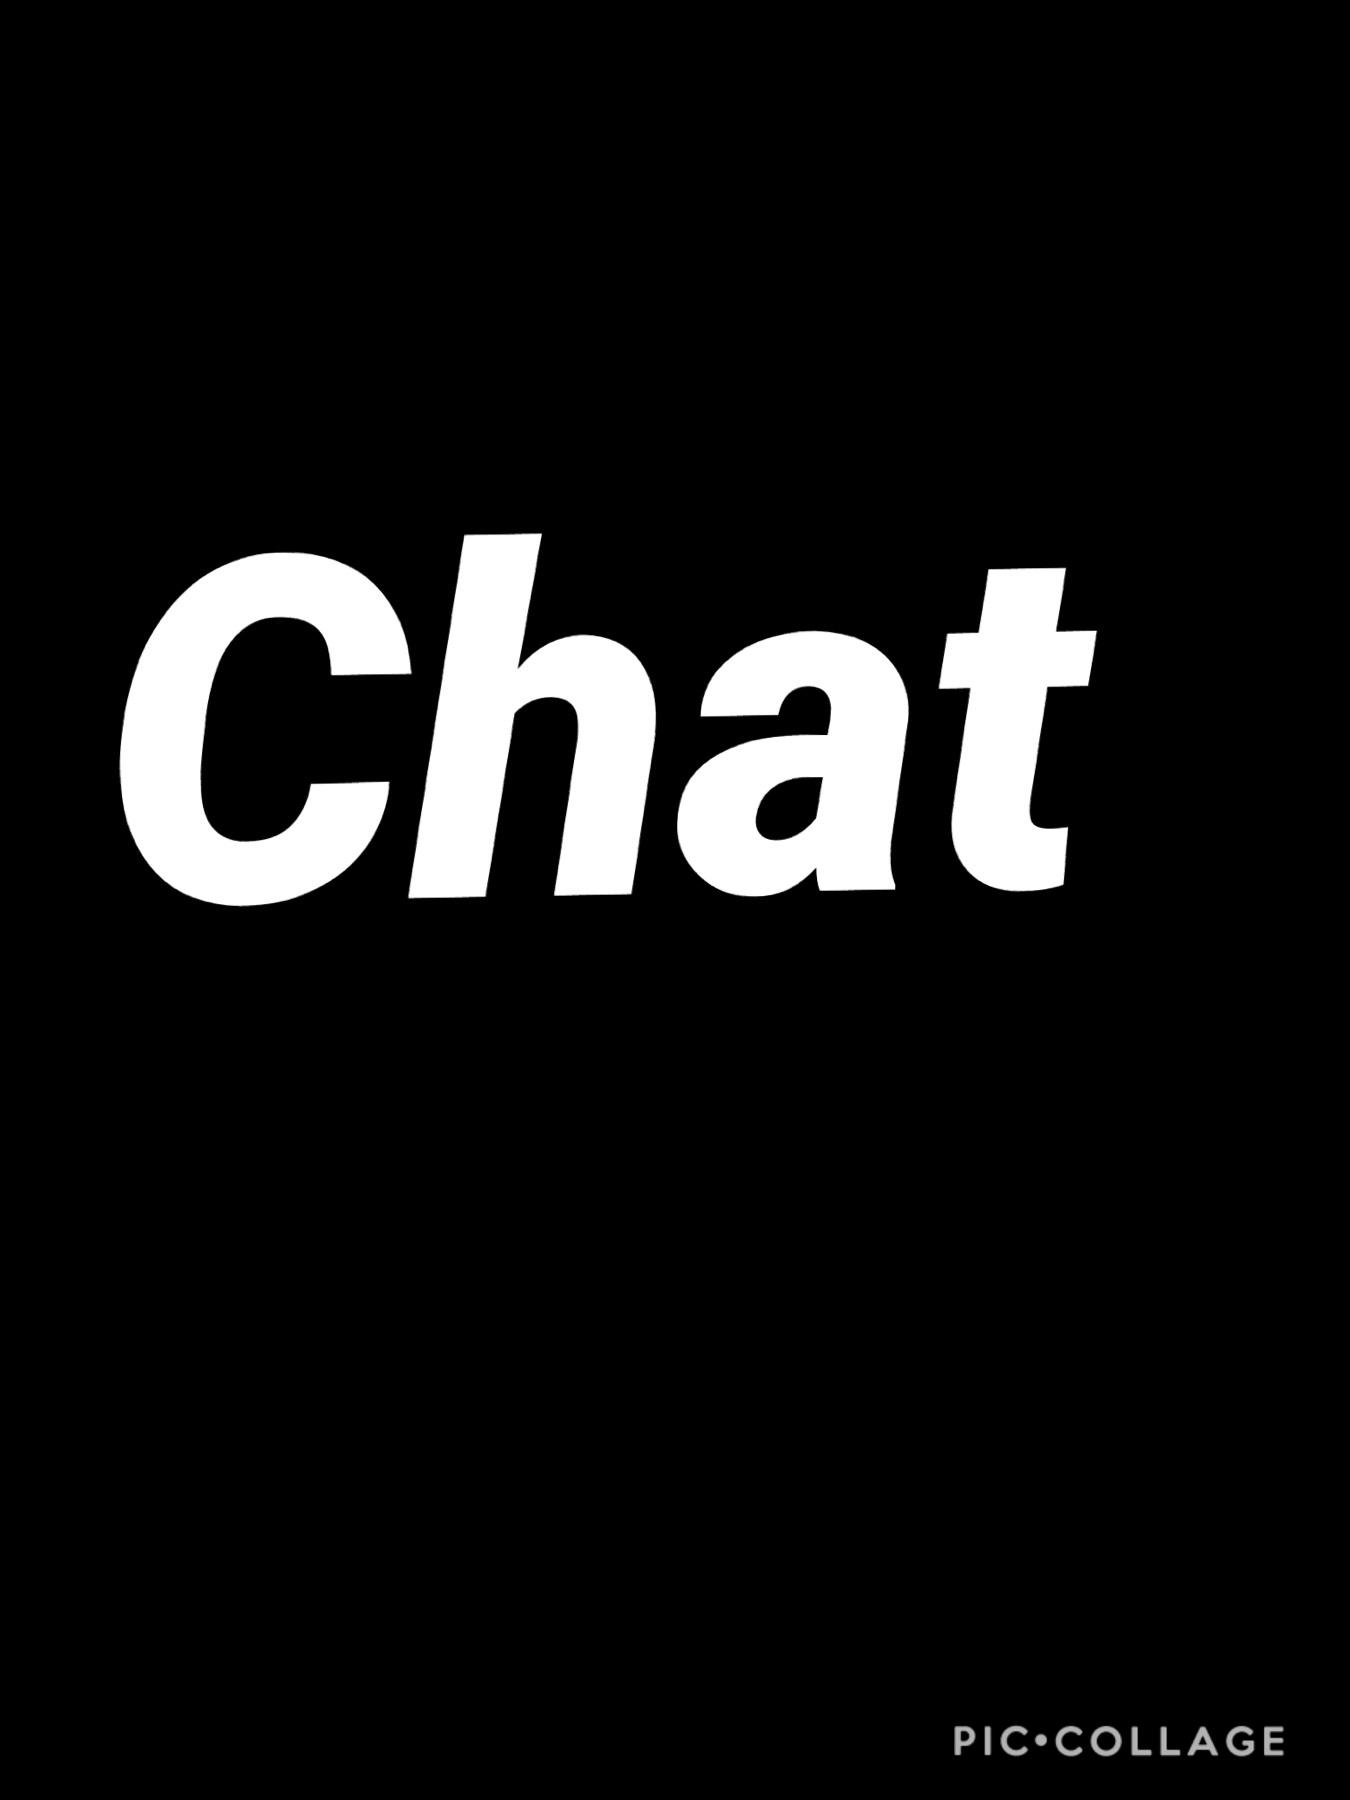 Chat
